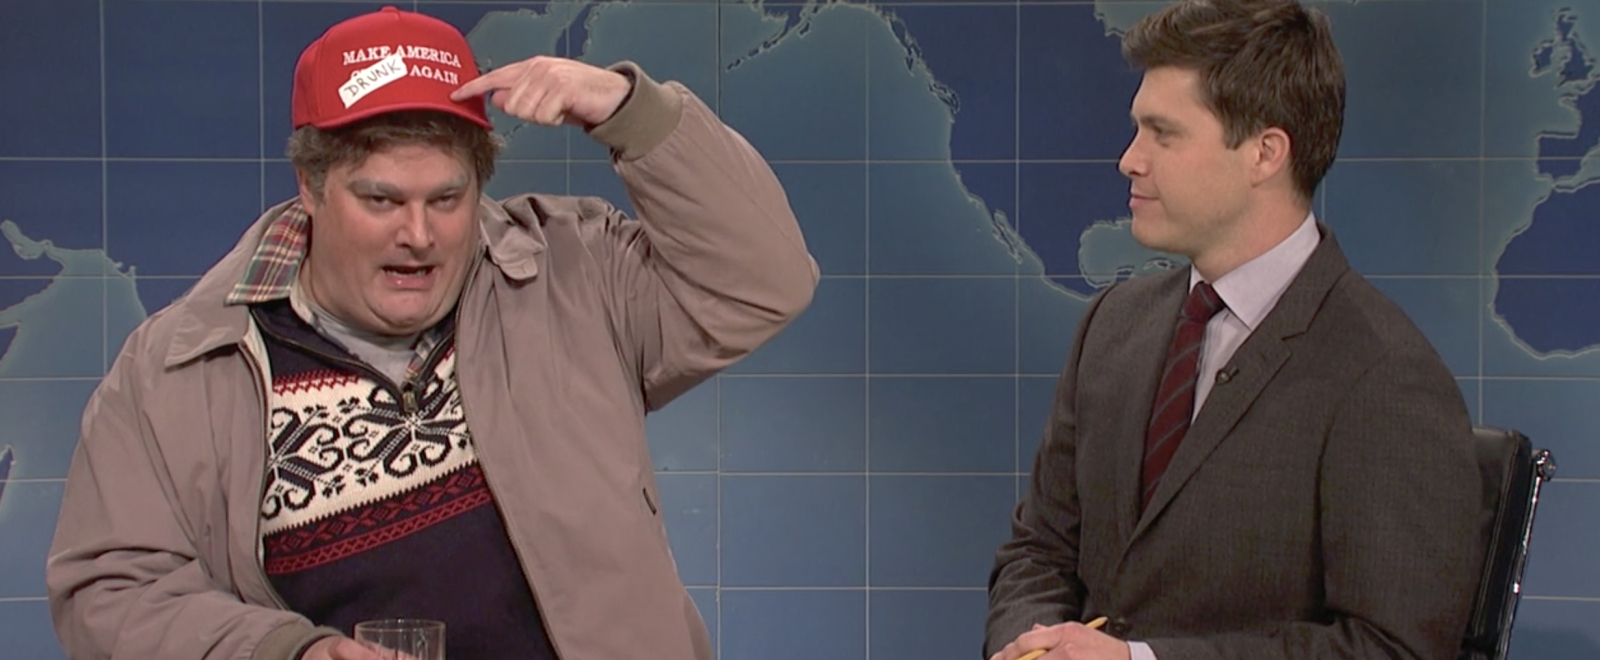 Trump Personally Thanked Bobby Moynihan For Having Racist, Sexist Drunk Uncle Be His ‘Number One Fan’ On ‘SNL’